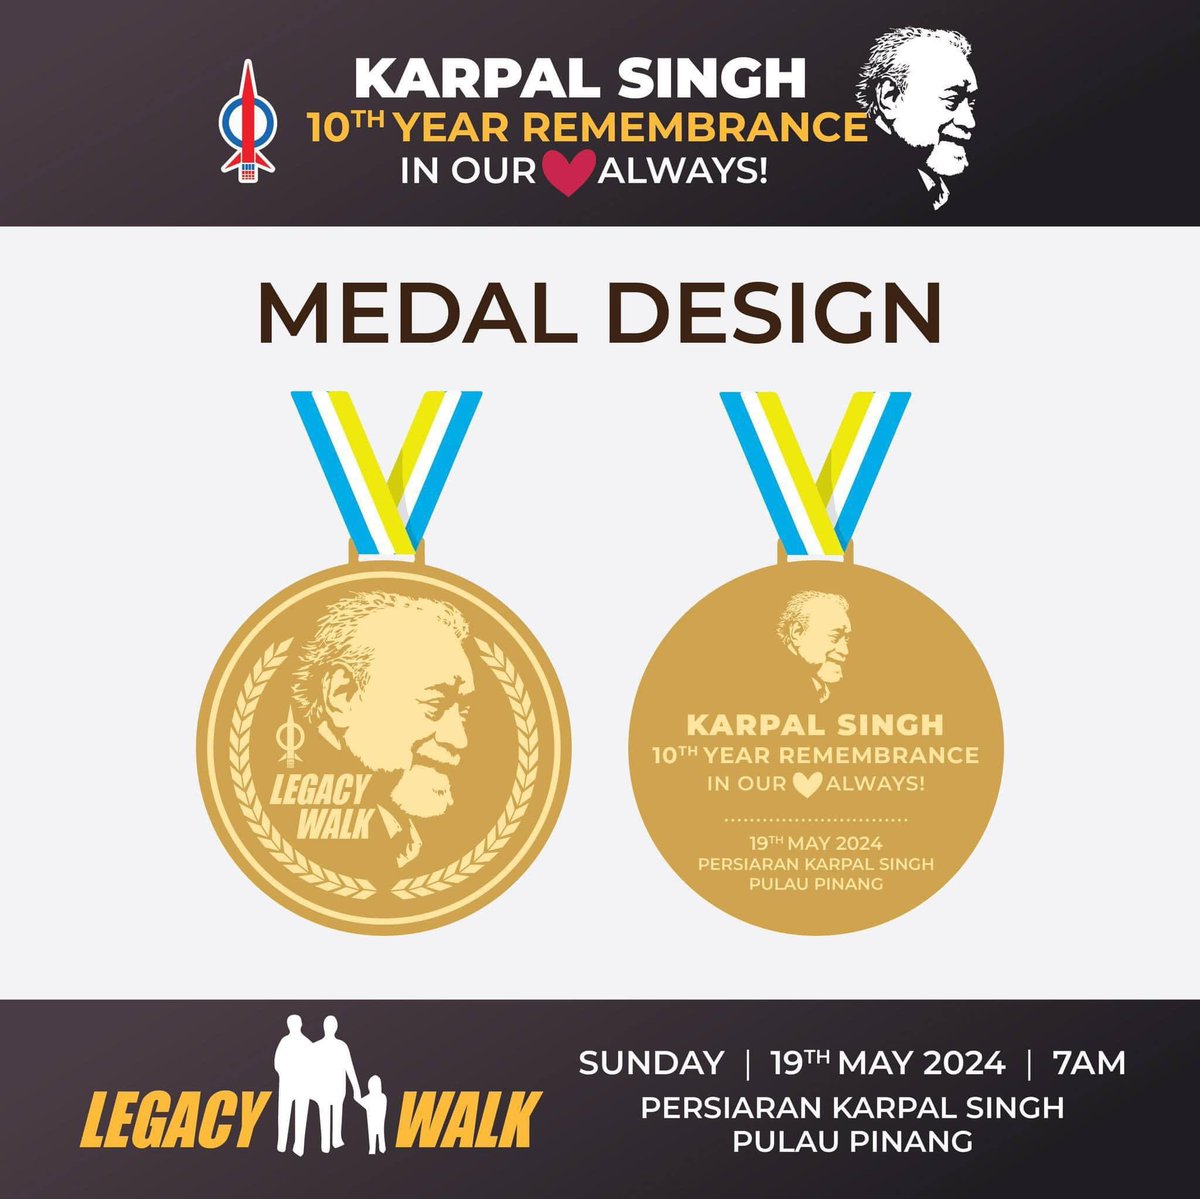 LEGACY WALK AT KARPAL SINGH DRIVE Register now at: howei.com/event_details/… For any inquiries, kindly contact Wisma DAP Penang at 04-2288482.